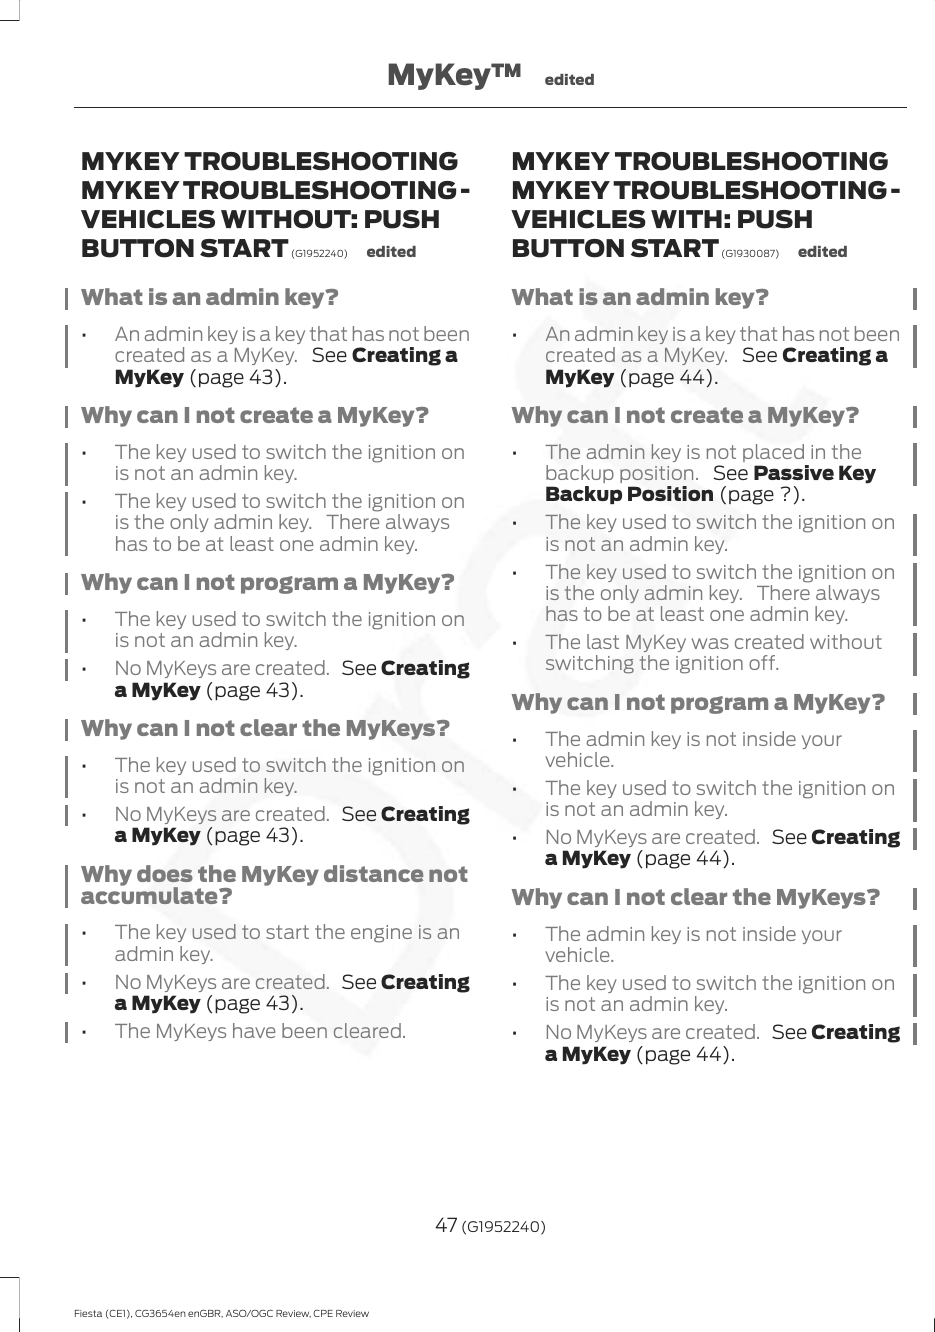 MYKEY TROUBLESHOOTINGMYKEY TROUBLESHOOTING -VEHICLES WITHOUT: PUSHBUTTON START (G1952240) editedWhat is an admin key?•An admin key is a key that has not beencreated as a MyKey.  See Creating aMyKey (page 43).Why can I not create a MyKey?•The key used to switch the ignition onis not an admin key.•The key used to switch the ignition onis the only admin key. There alwayshas to be at least one admin key.Why can I not program a MyKey?•The key used to switch the ignition onis not an admin key.•No MyKeys are created.  See Creatinga MyKey (page 43).Why can I not clear the MyKeys?•The key used to switch the ignition onis not an admin key.•No MyKeys are created.  See Creatinga MyKey (page 43).Why does the MyKey distance notaccumulate?•The key used to start the engine is anadmin key.•No MyKeys are created.  See Creatinga MyKey (page 43).•The MyKeys have been cleared.MYKEY TROUBLESHOOTINGMYKEY TROUBLESHOOTING -VEHICLES WITH: PUSHBUTTON START (G1930087) editedWhat is an admin key?•An admin key is a key that has not beencreated as a MyKey.  See Creating aMyKey (page 44).Why can I not create a MyKey?•The admin key is not placed in thebackup position.  See Passive KeyBackup Position (page ?).•The key used to switch the ignition onis not an admin key.•The key used to switch the ignition onis the only admin key. There alwayshas to be at least one admin key.•The last MyKey was created withoutswitching the ignition off.Why can I not program a MyKey?•The admin key is not inside yourvehicle.•The key used to switch the ignition onis not an admin key.•No MyKeys are created.  See Creatinga MyKey (page 44).Why can I not clear the MyKeys?•The admin key is not inside yourvehicle.•The key used to switch the ignition onis not an admin key.•No MyKeys are created.  See Creatinga MyKey (page 44).47 (G1952240)Fiesta (CE1), CG3654en enGBR, ASO/OGC Review, CPE ReviewMyKey™ edited